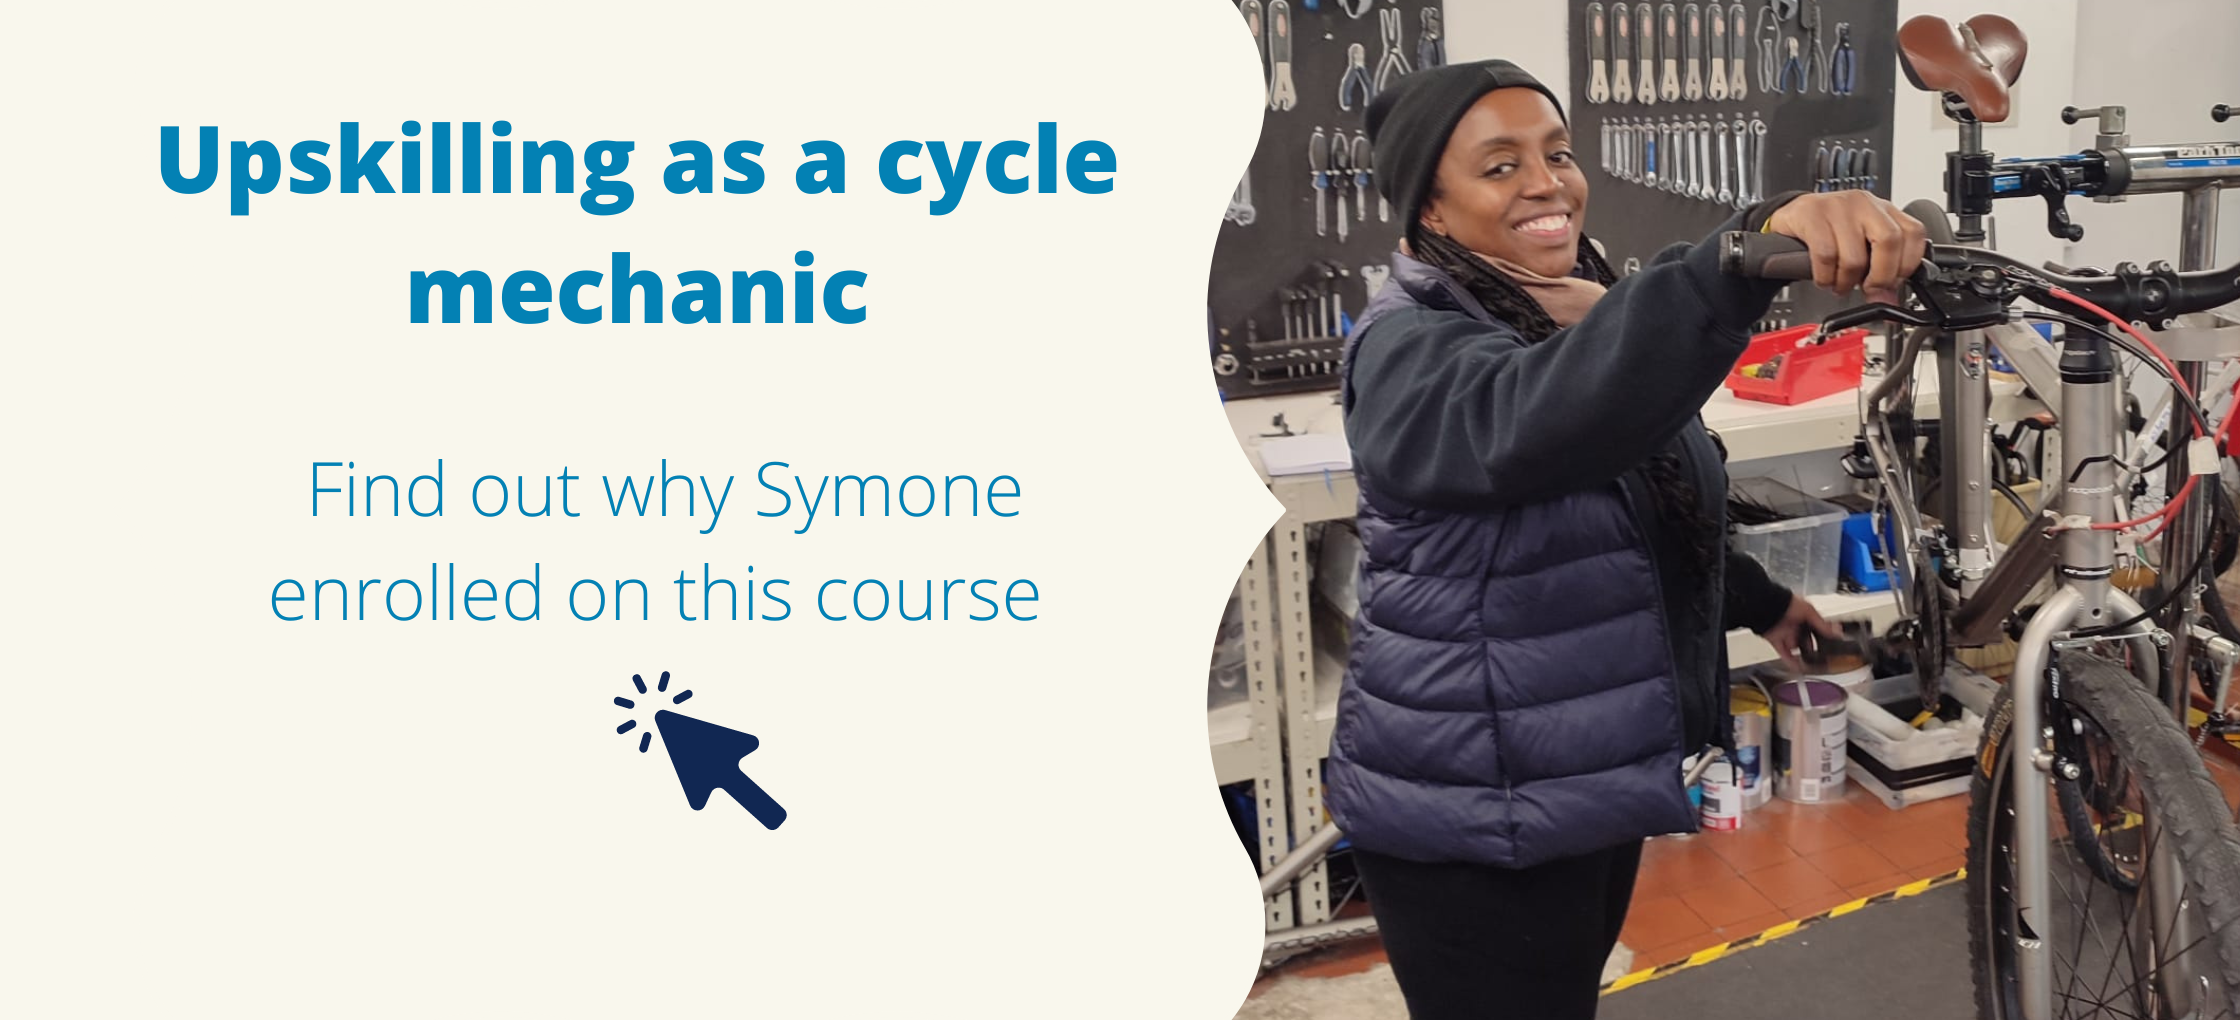 web banner showing young lady with a cycle, during city and guilds level 1 course